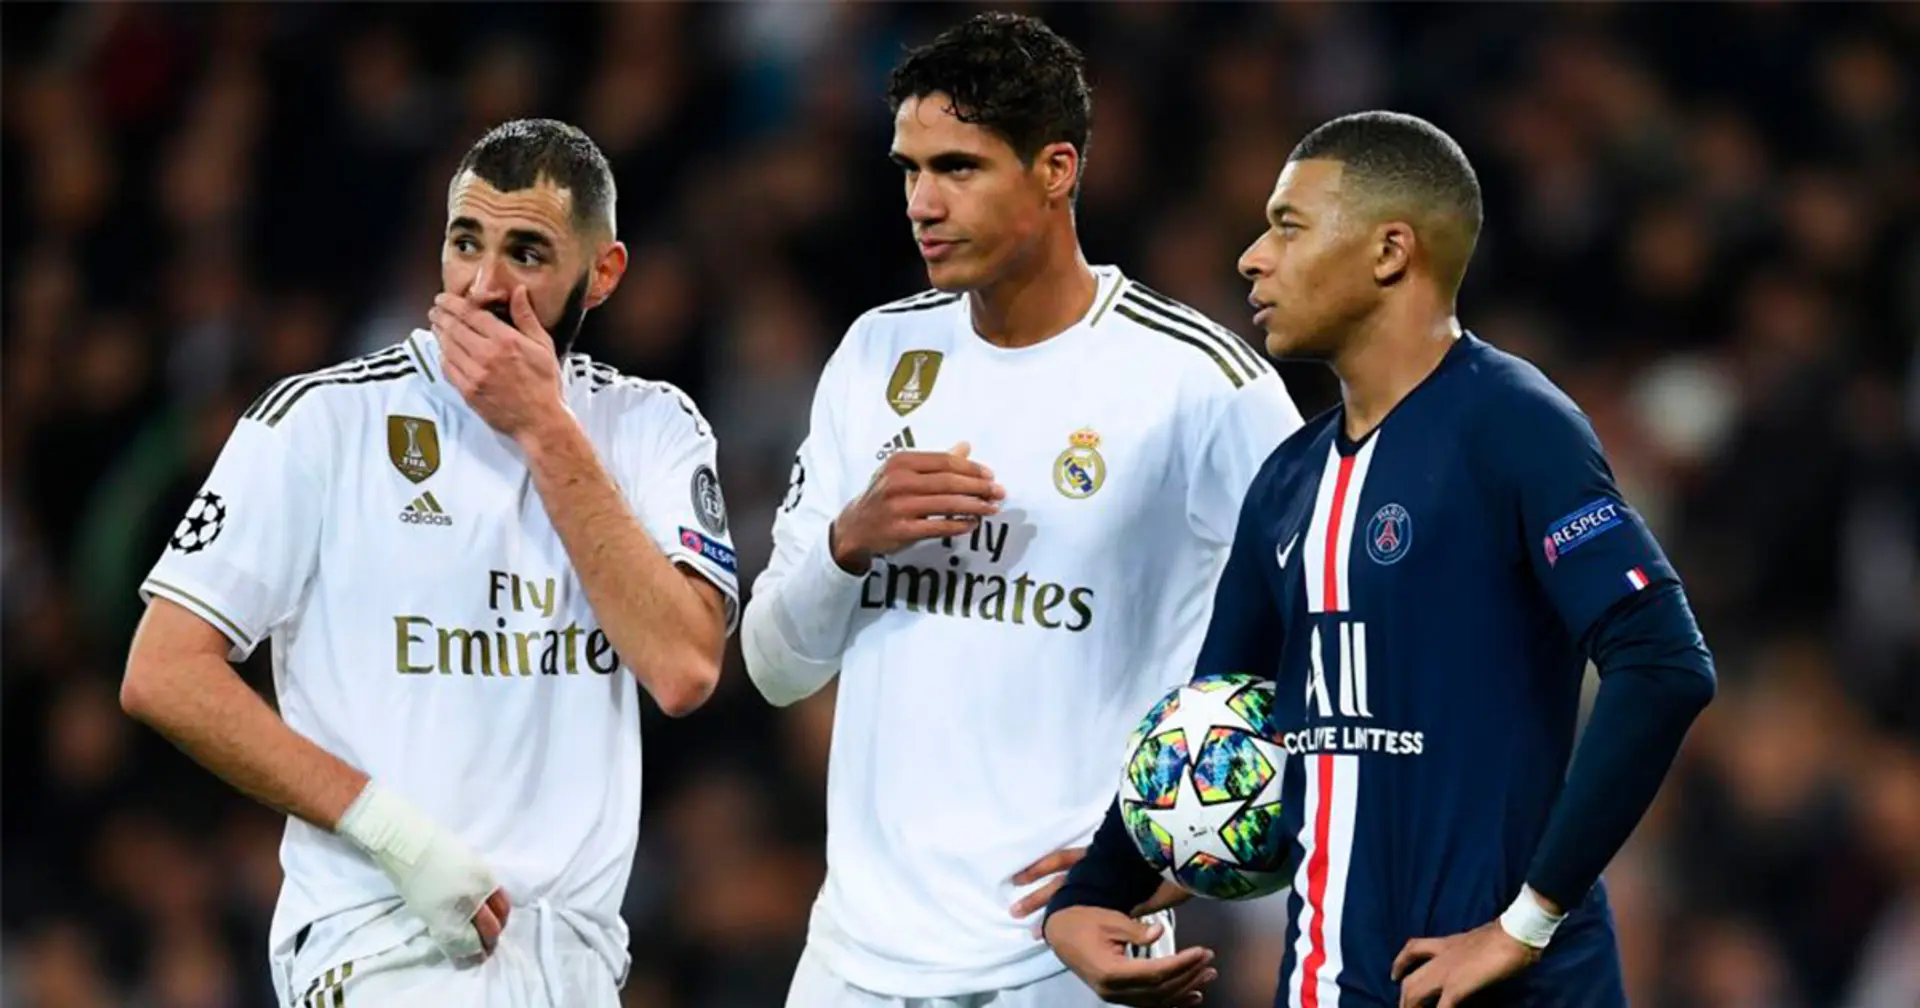 IF Paris Saint-Germain were to lose to Real Madrid in the 2021 UEFA Champions League Final...